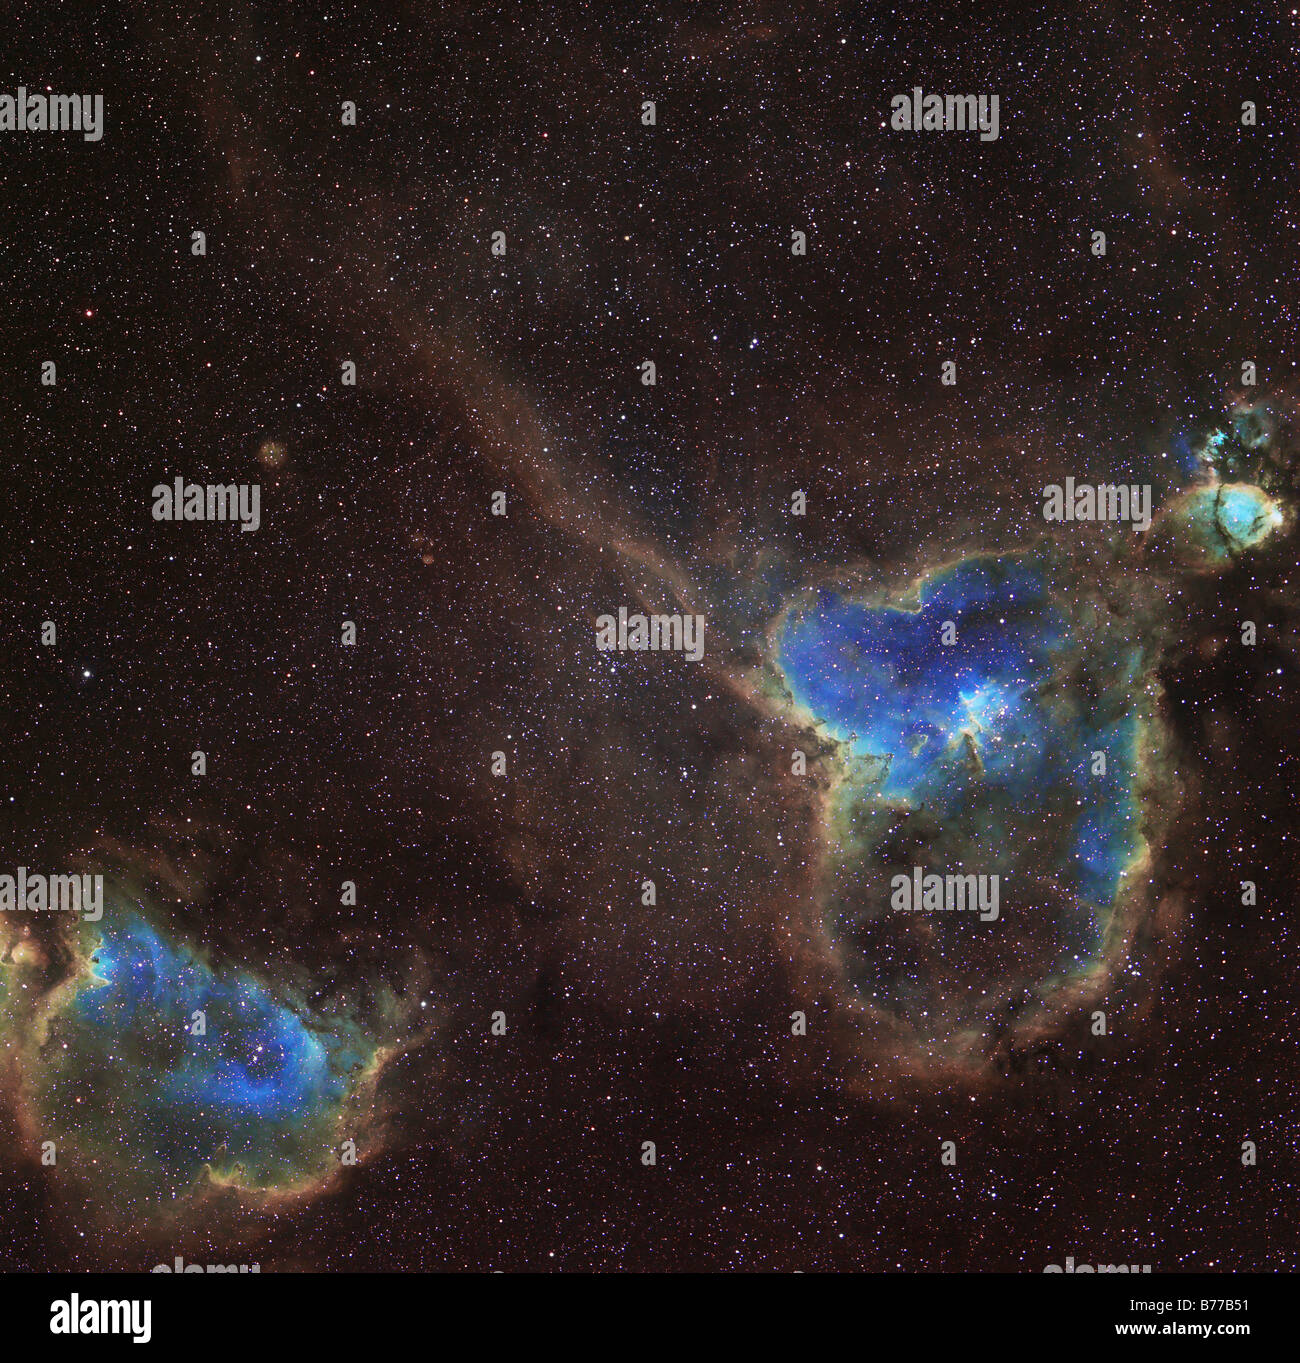 IC 1805 and IC 1848 Nebula, also known as the Heart and Soul Nebula. Stock Photo